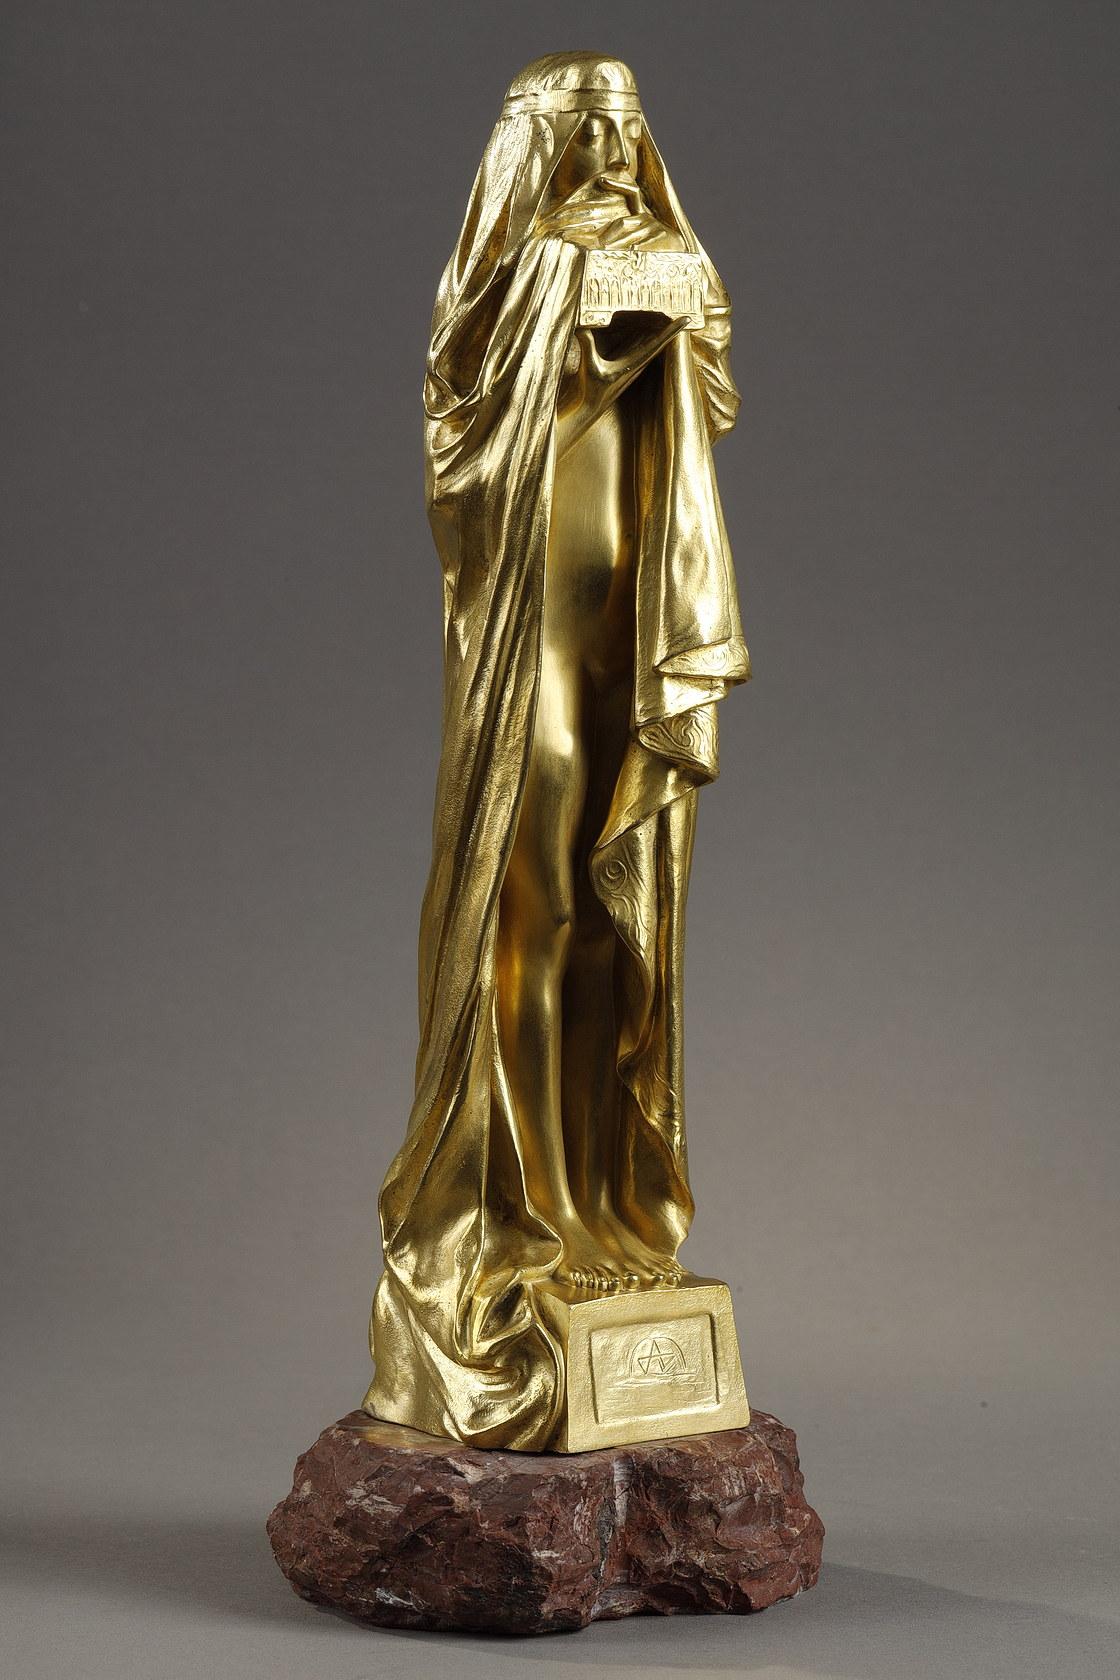 The Secret
by Pierre-Félix FIX-MASSEAU (1869-1937)

Gilded bronze
Signed on the side 